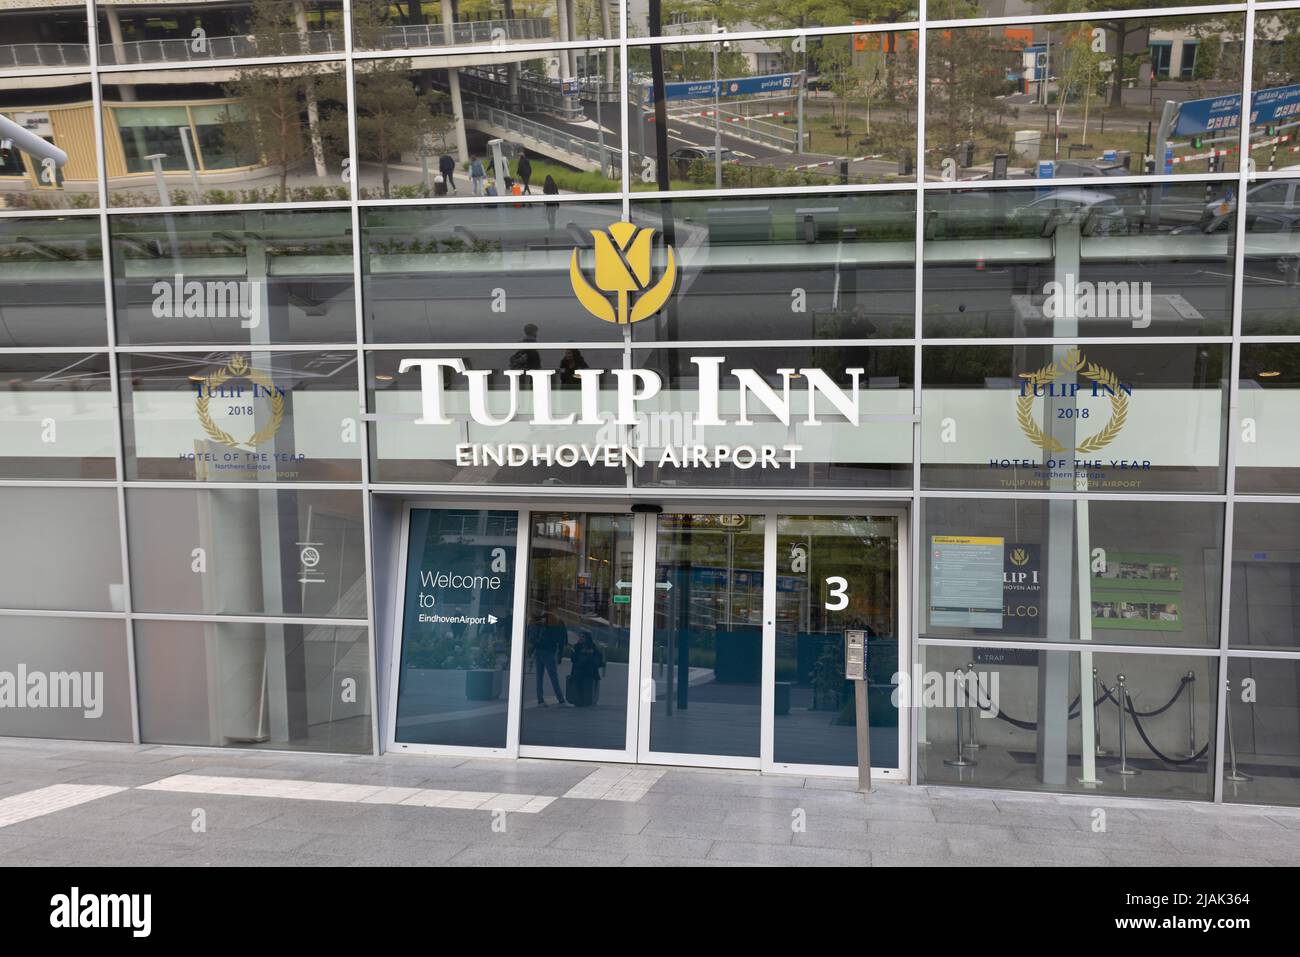 Hotel Tulip Inn glass door entrance at Eindhoven Airport Stock Photo